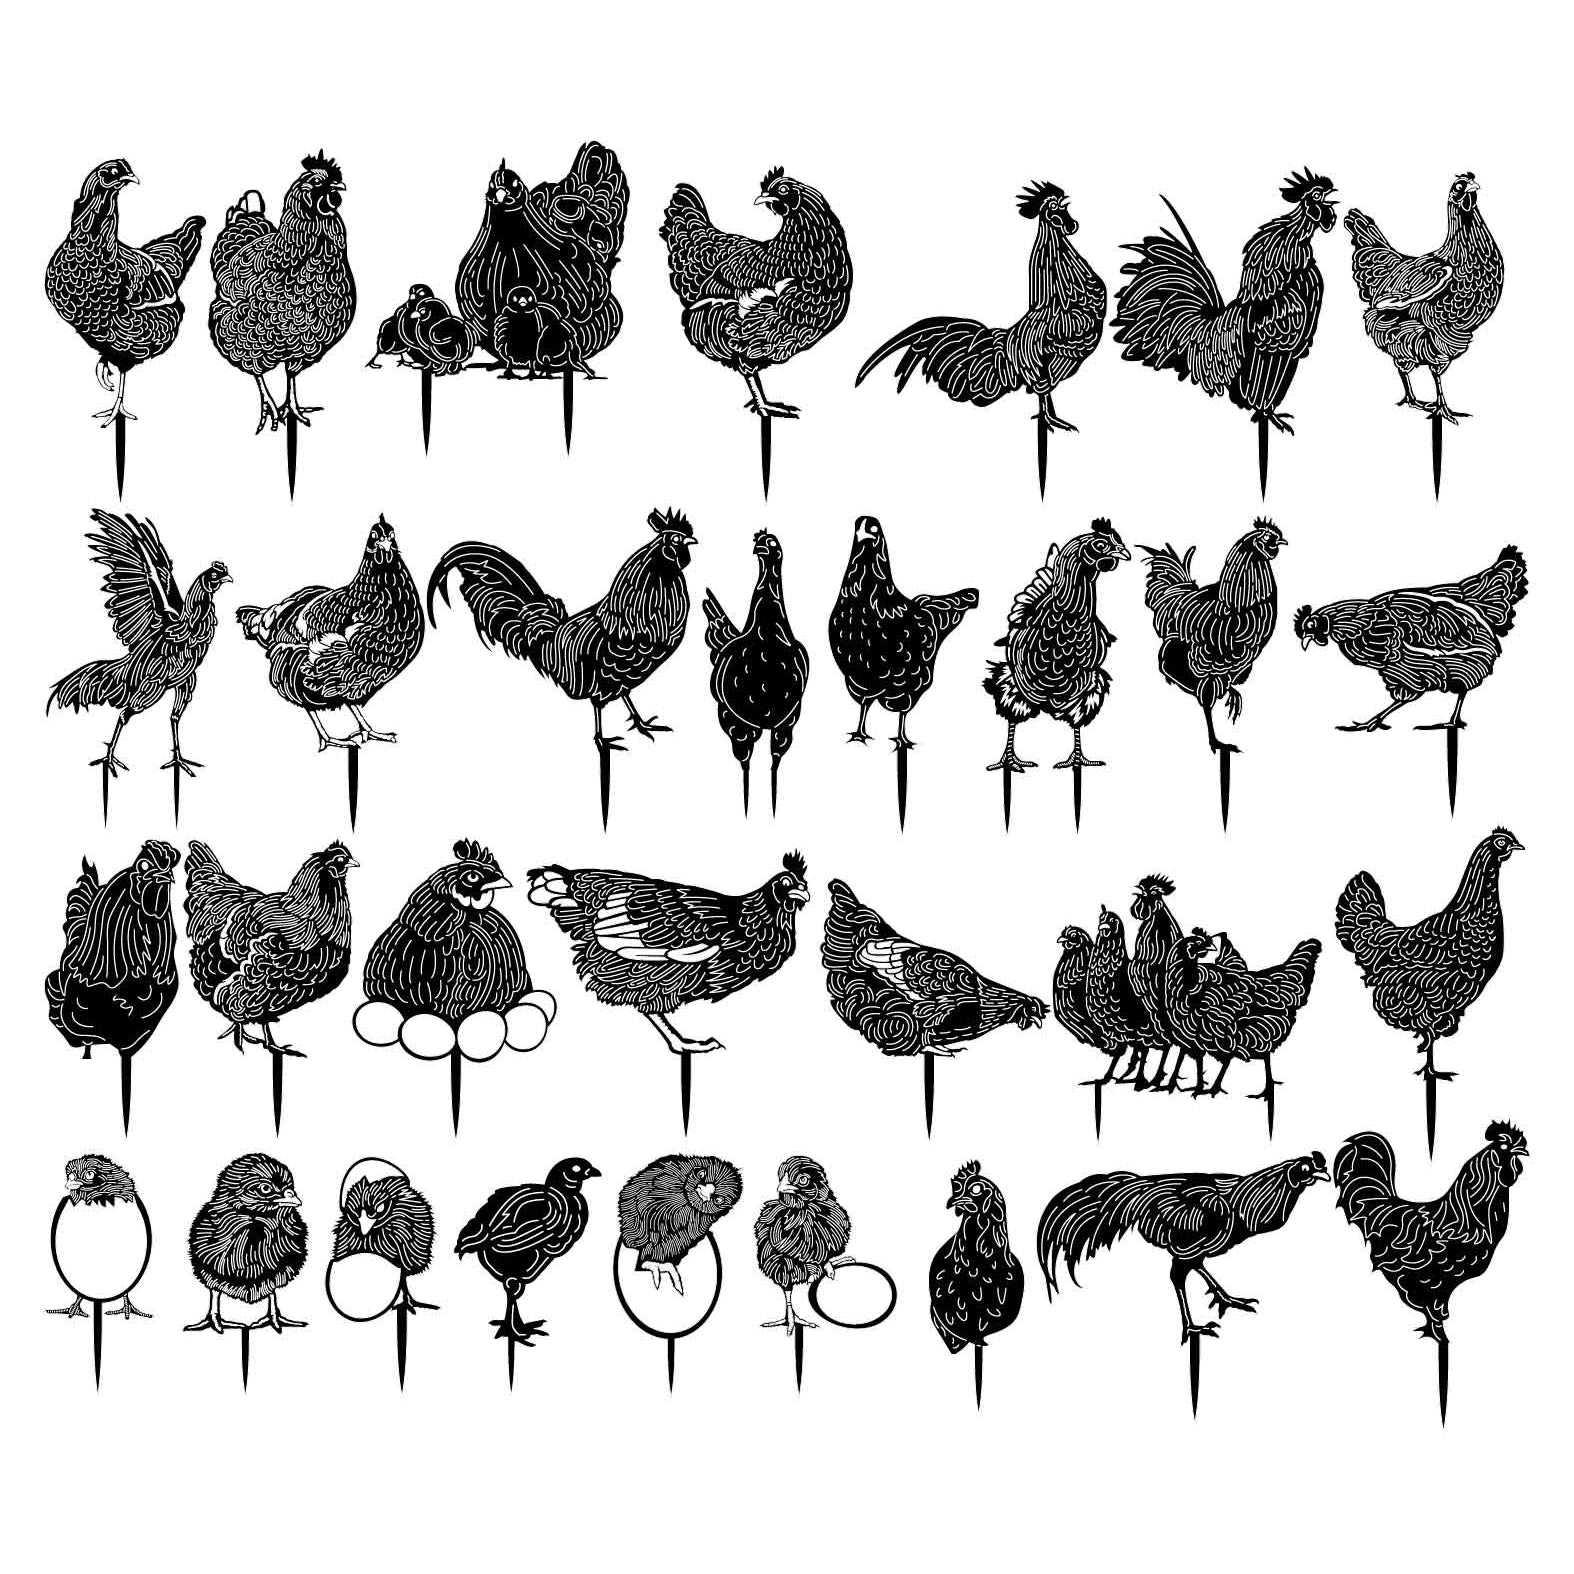 Chickens and Rooster Garden Stakes-DXF files Cut Ready for CNC-DXFforCNC.com